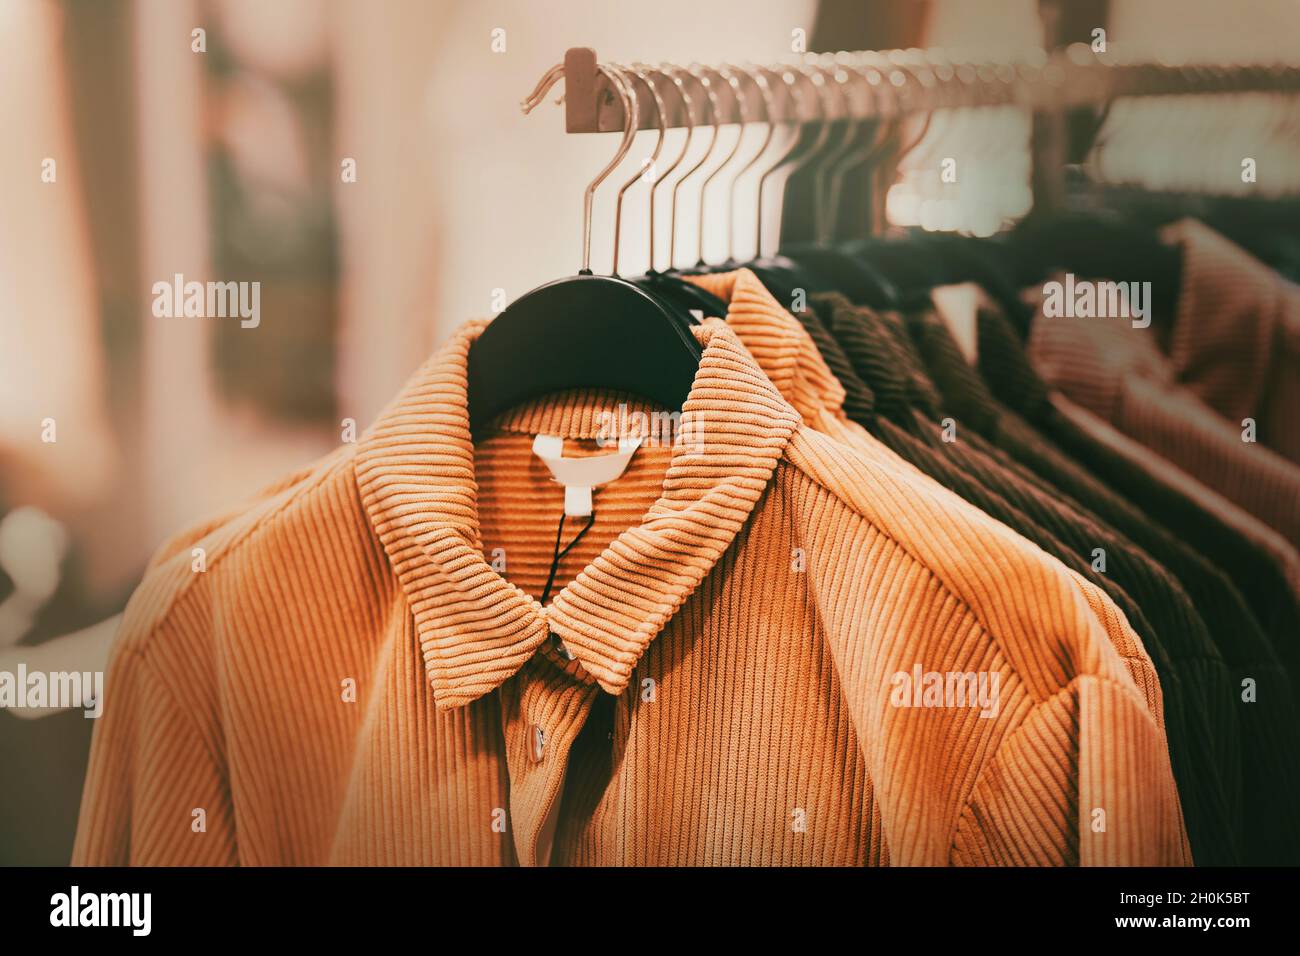 Beautiful corduroy coats for the autumn season in ginger and brown colors hang on hangers in a clothing store in the mall. Shopping. Stock Photo